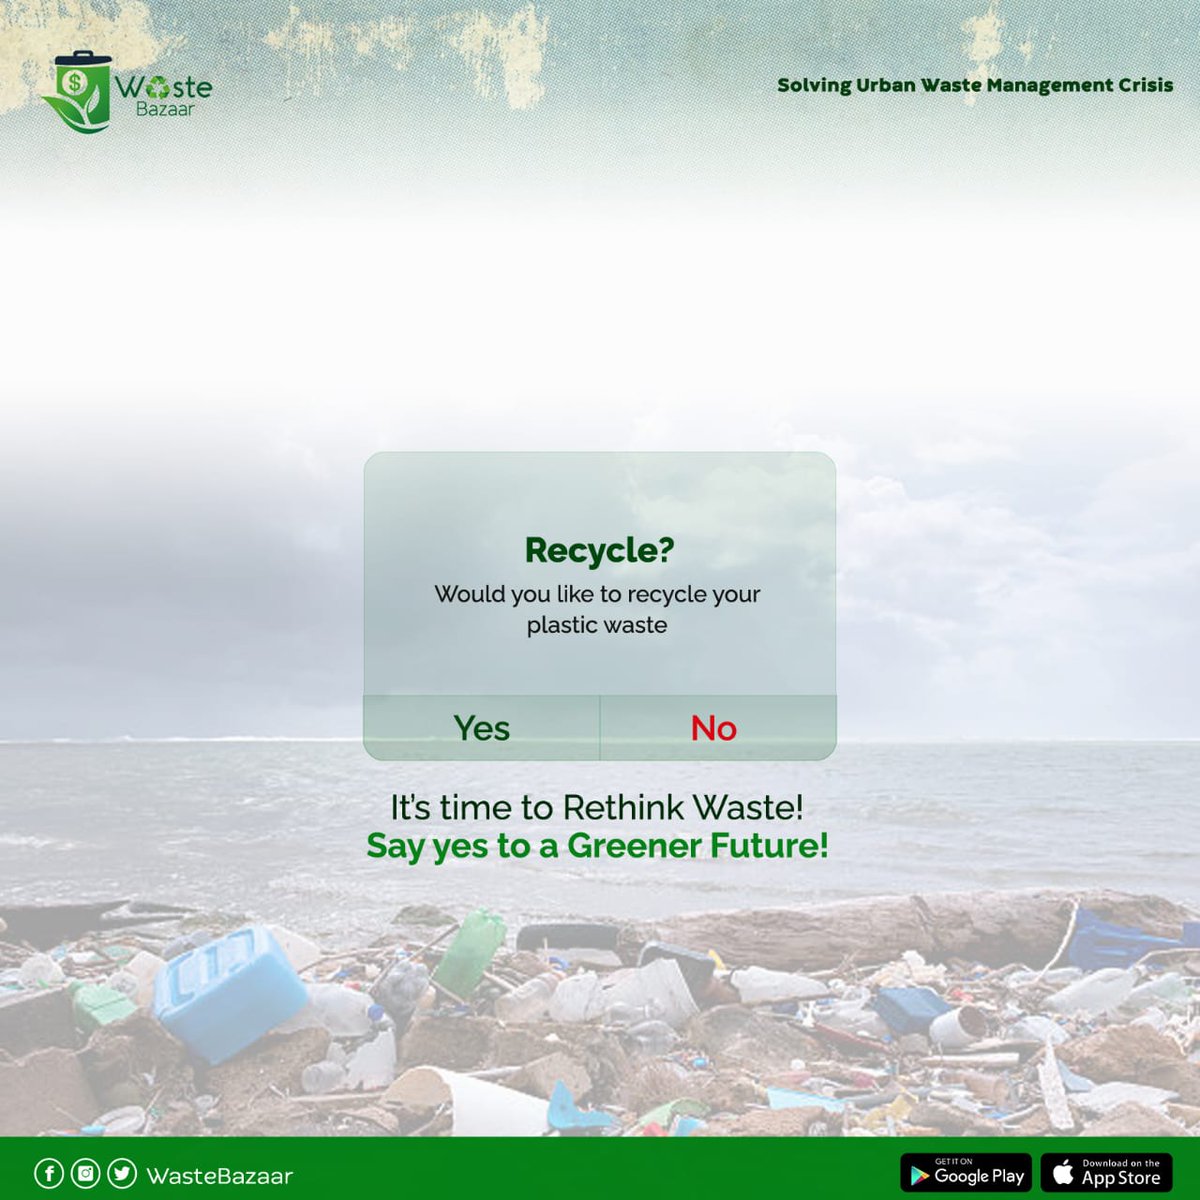 Ready to plug into the ongoing Green Revolution? 
Don’t be left out on the mission to reshape #urban #sanitation & build #sustainable #cities. 
Download #WasteBazaar app today to enjoy optimized urban #wastemanagement on-demand.
#RethinkWaste #greenerCities #ChooseSustainability